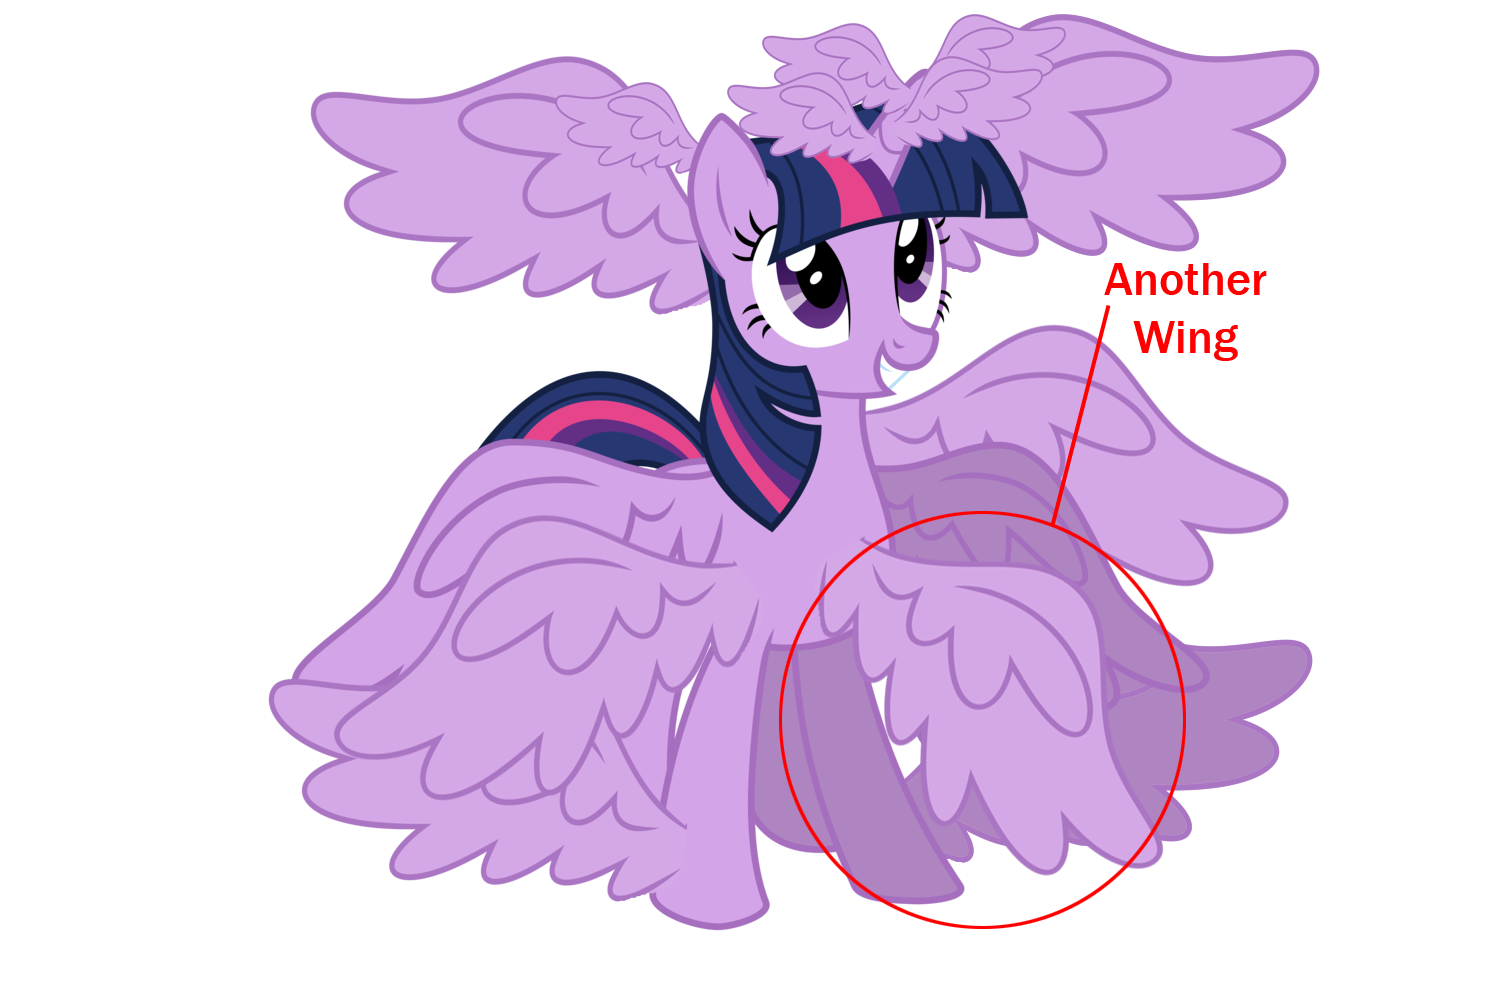 Equestria Daily - MLP Stuff!: Hasbro Adds ANOTHER Wing to Twilight Sparkle